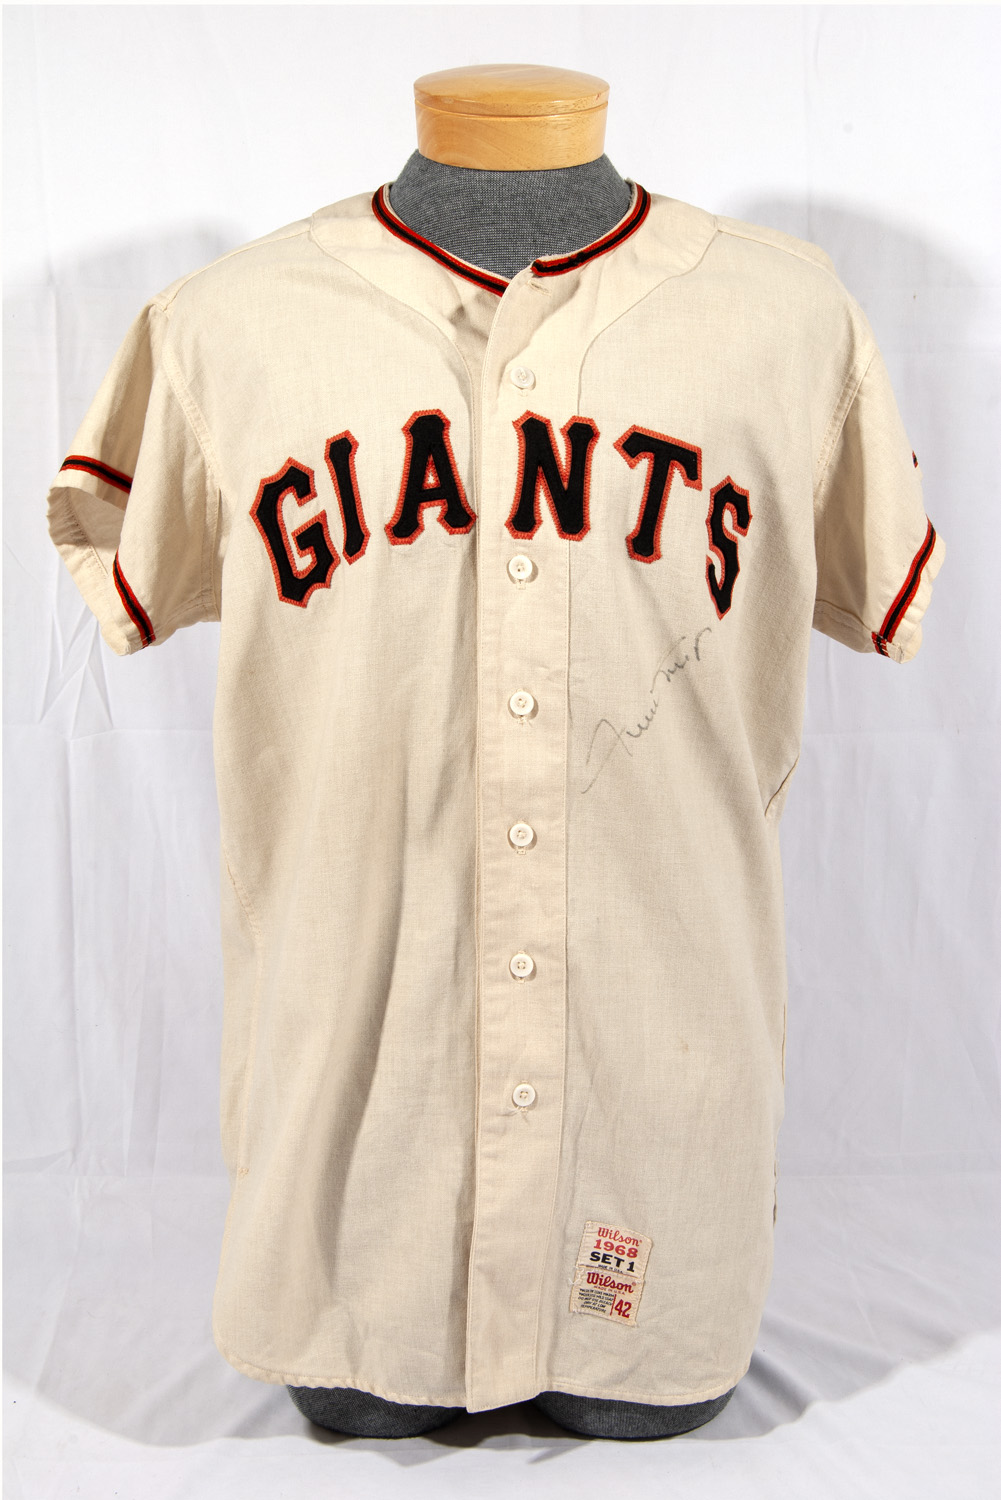 willie mays giants jersey